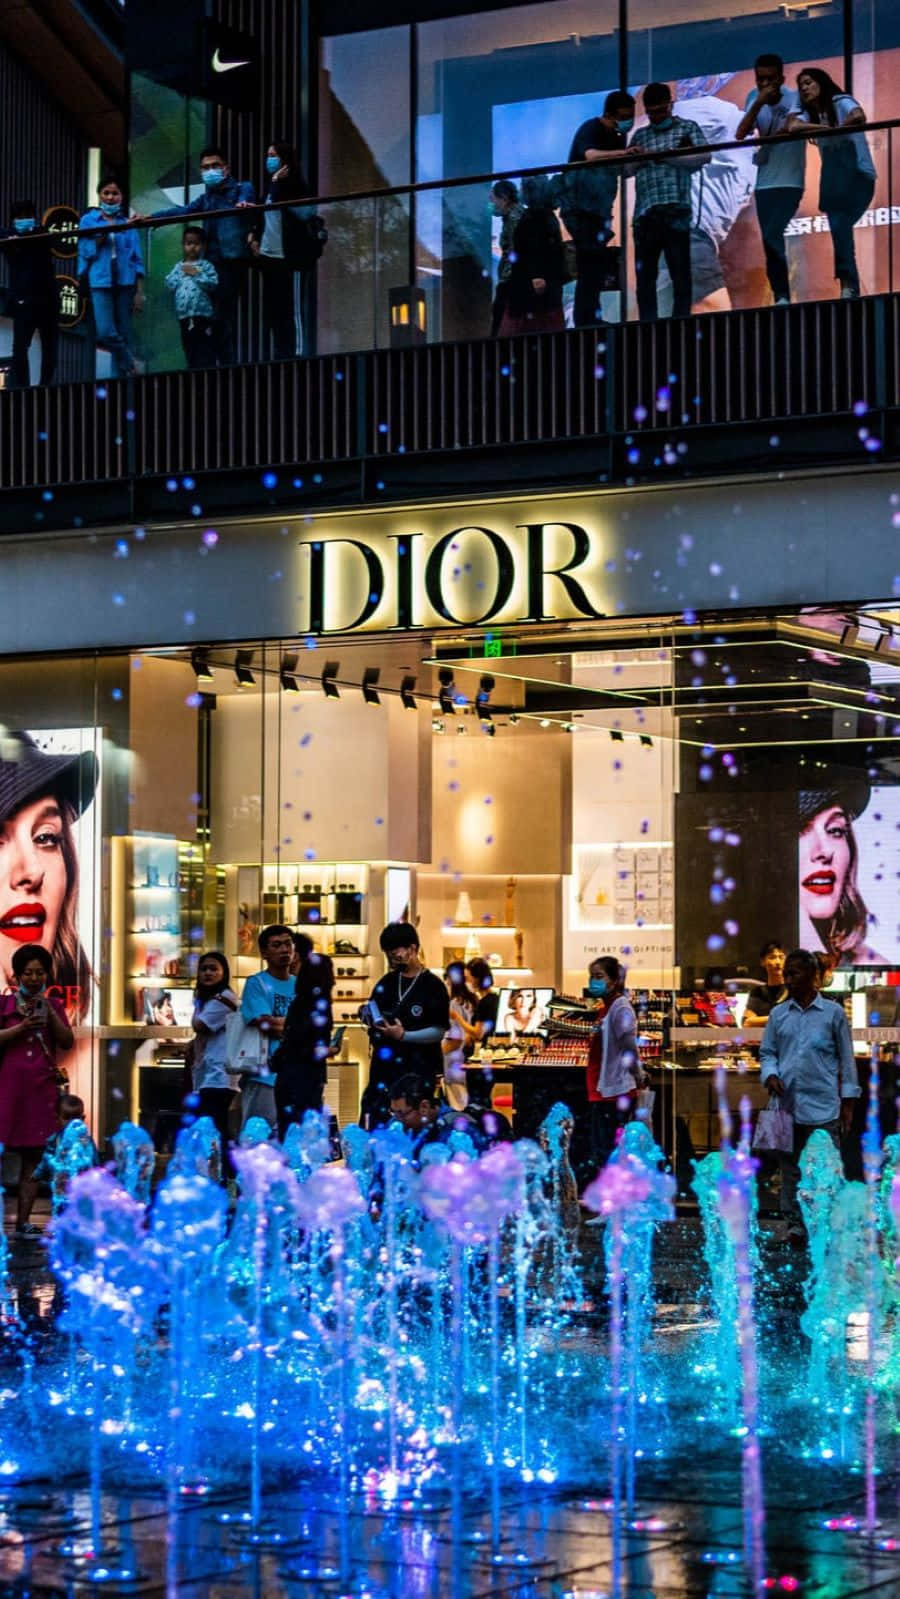 Dior Storefront Nighttime Fountain Display Wallpaper